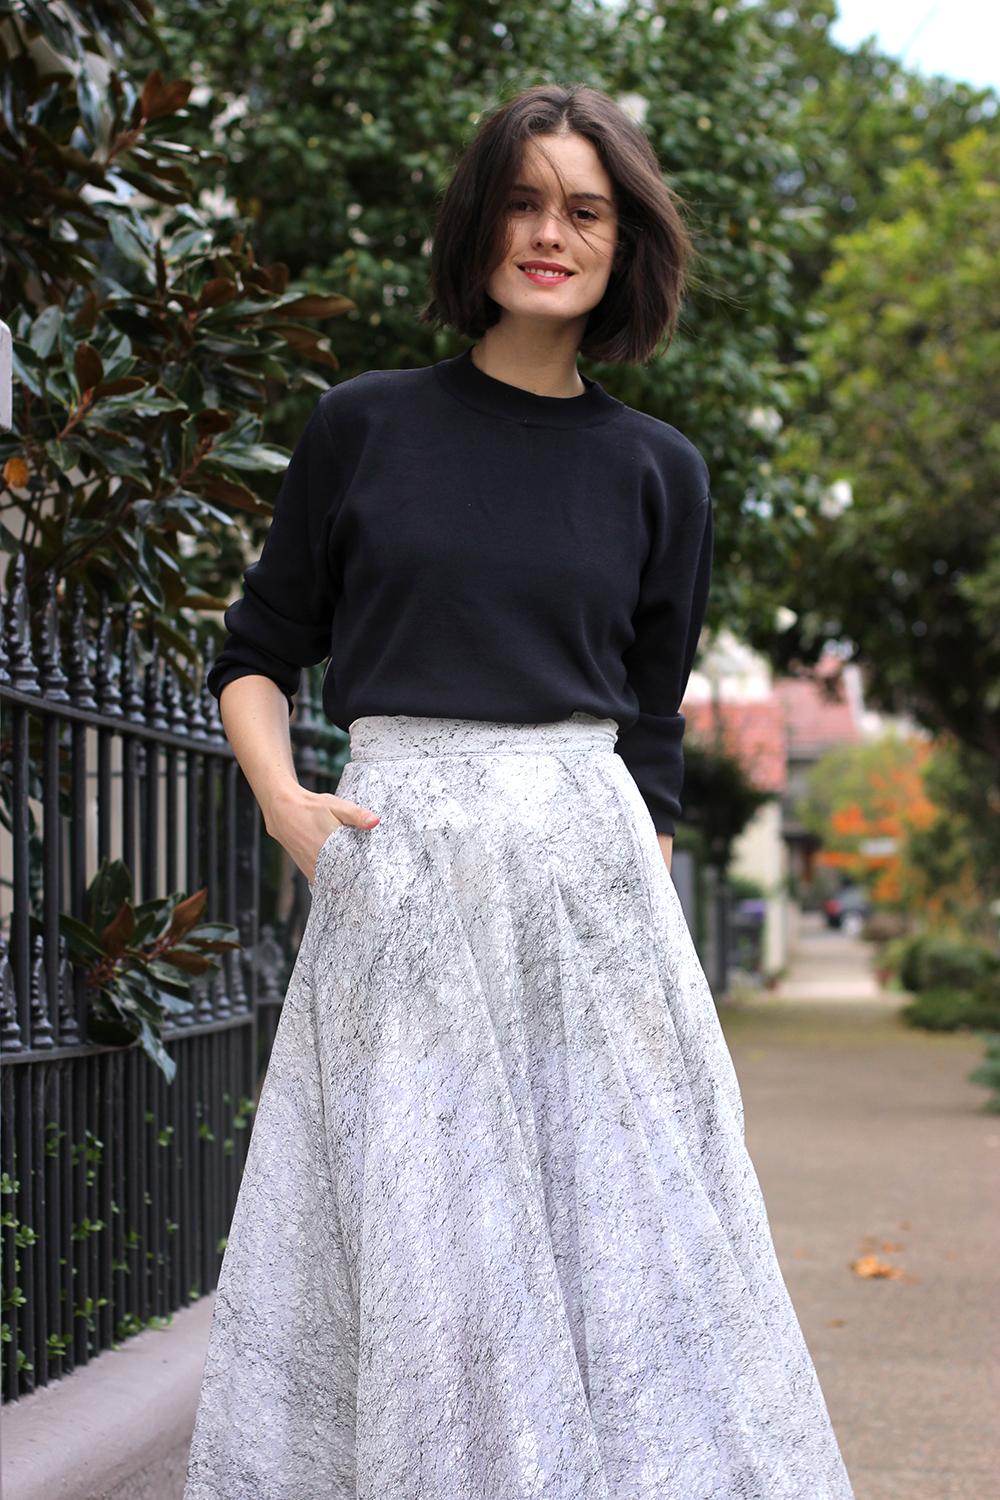 Chloe Hill wearing Maticevski full midi skirt and super youth black knit sweater on the streets of sydney